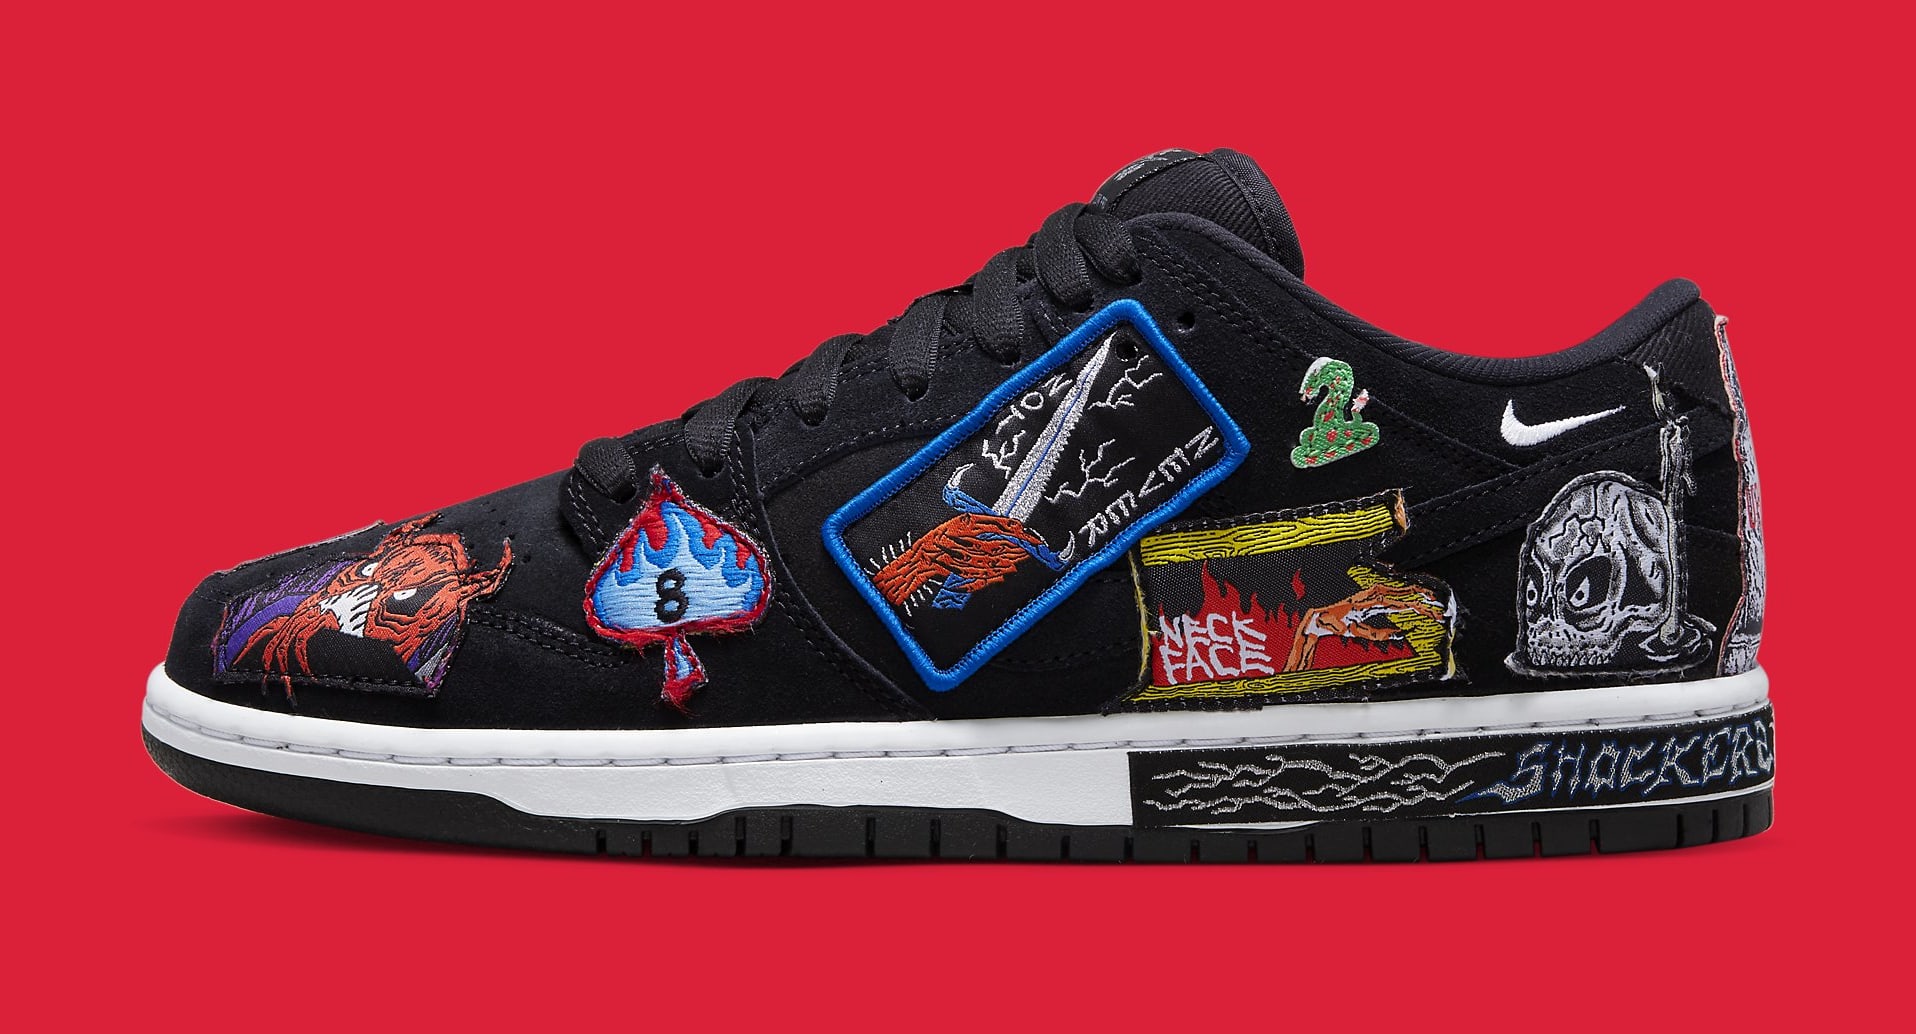 Neckface Nike SB Dunk Low Collaboration Release Date DQ4488-001 